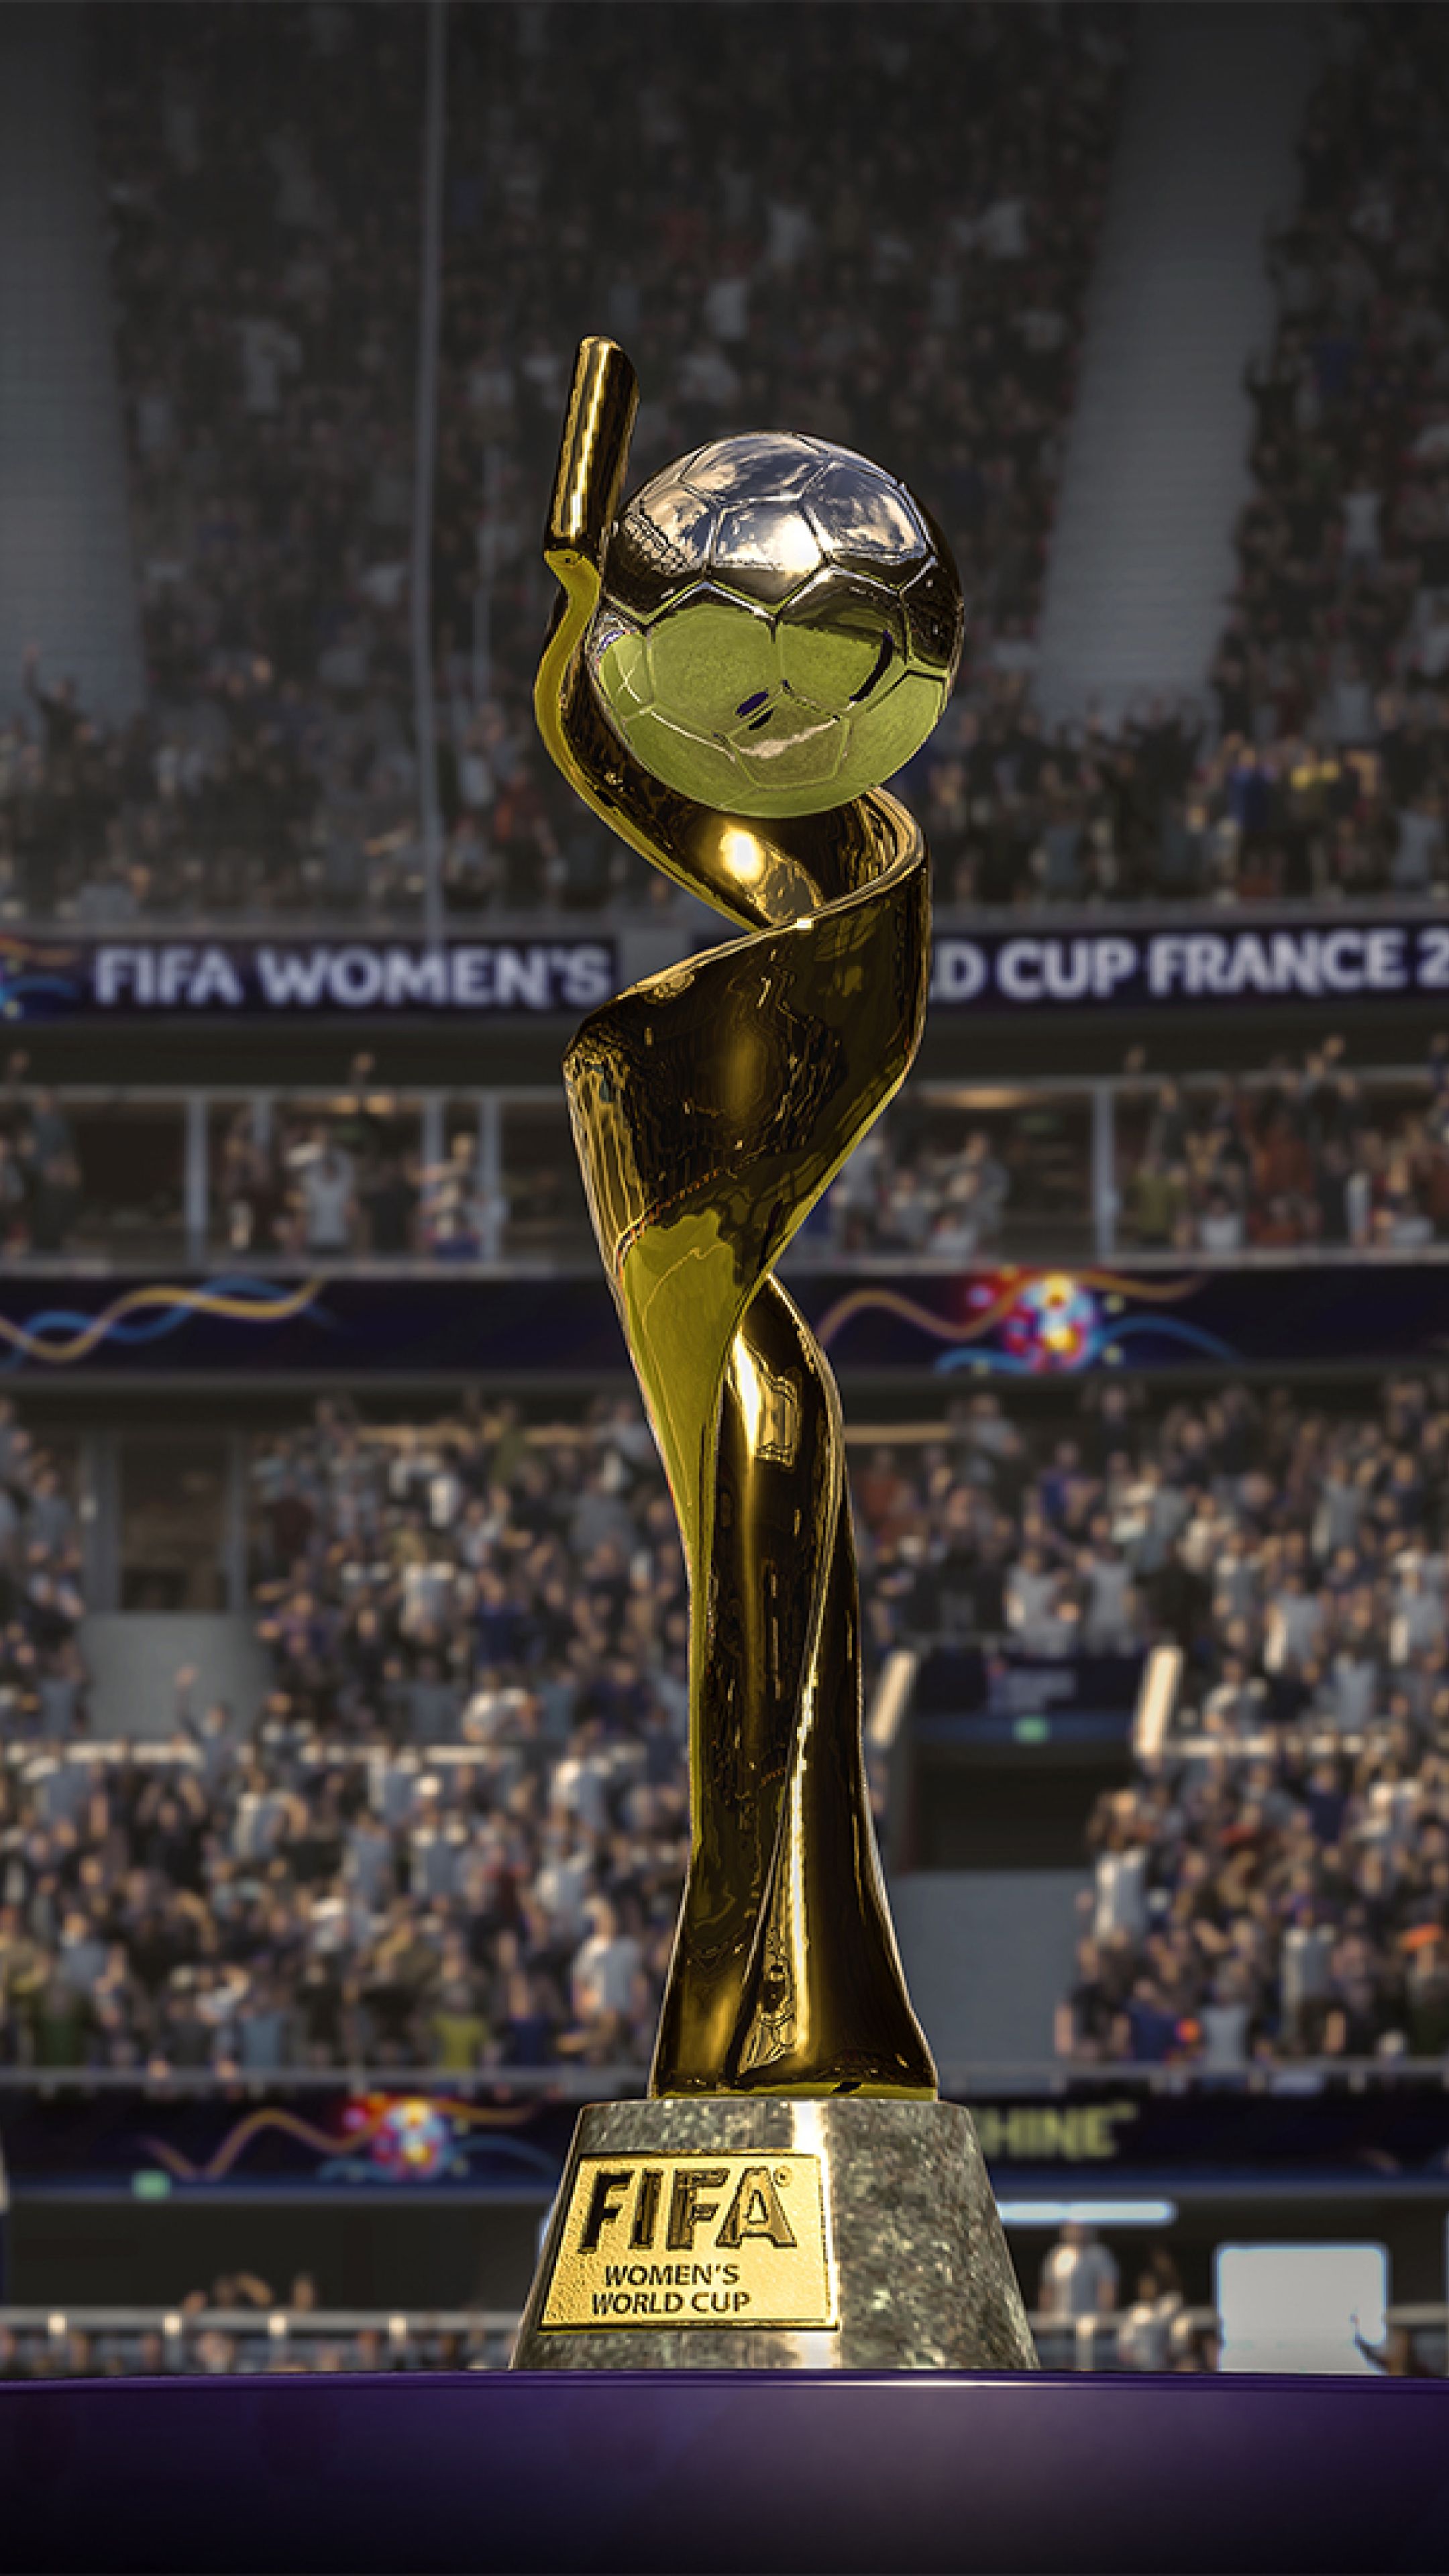 Trophy FIFA 19 Sony Xperia X, XZ, Z5 Premium Wallpaper, HD Games 4K Wallpaper, Image, Photo and Background